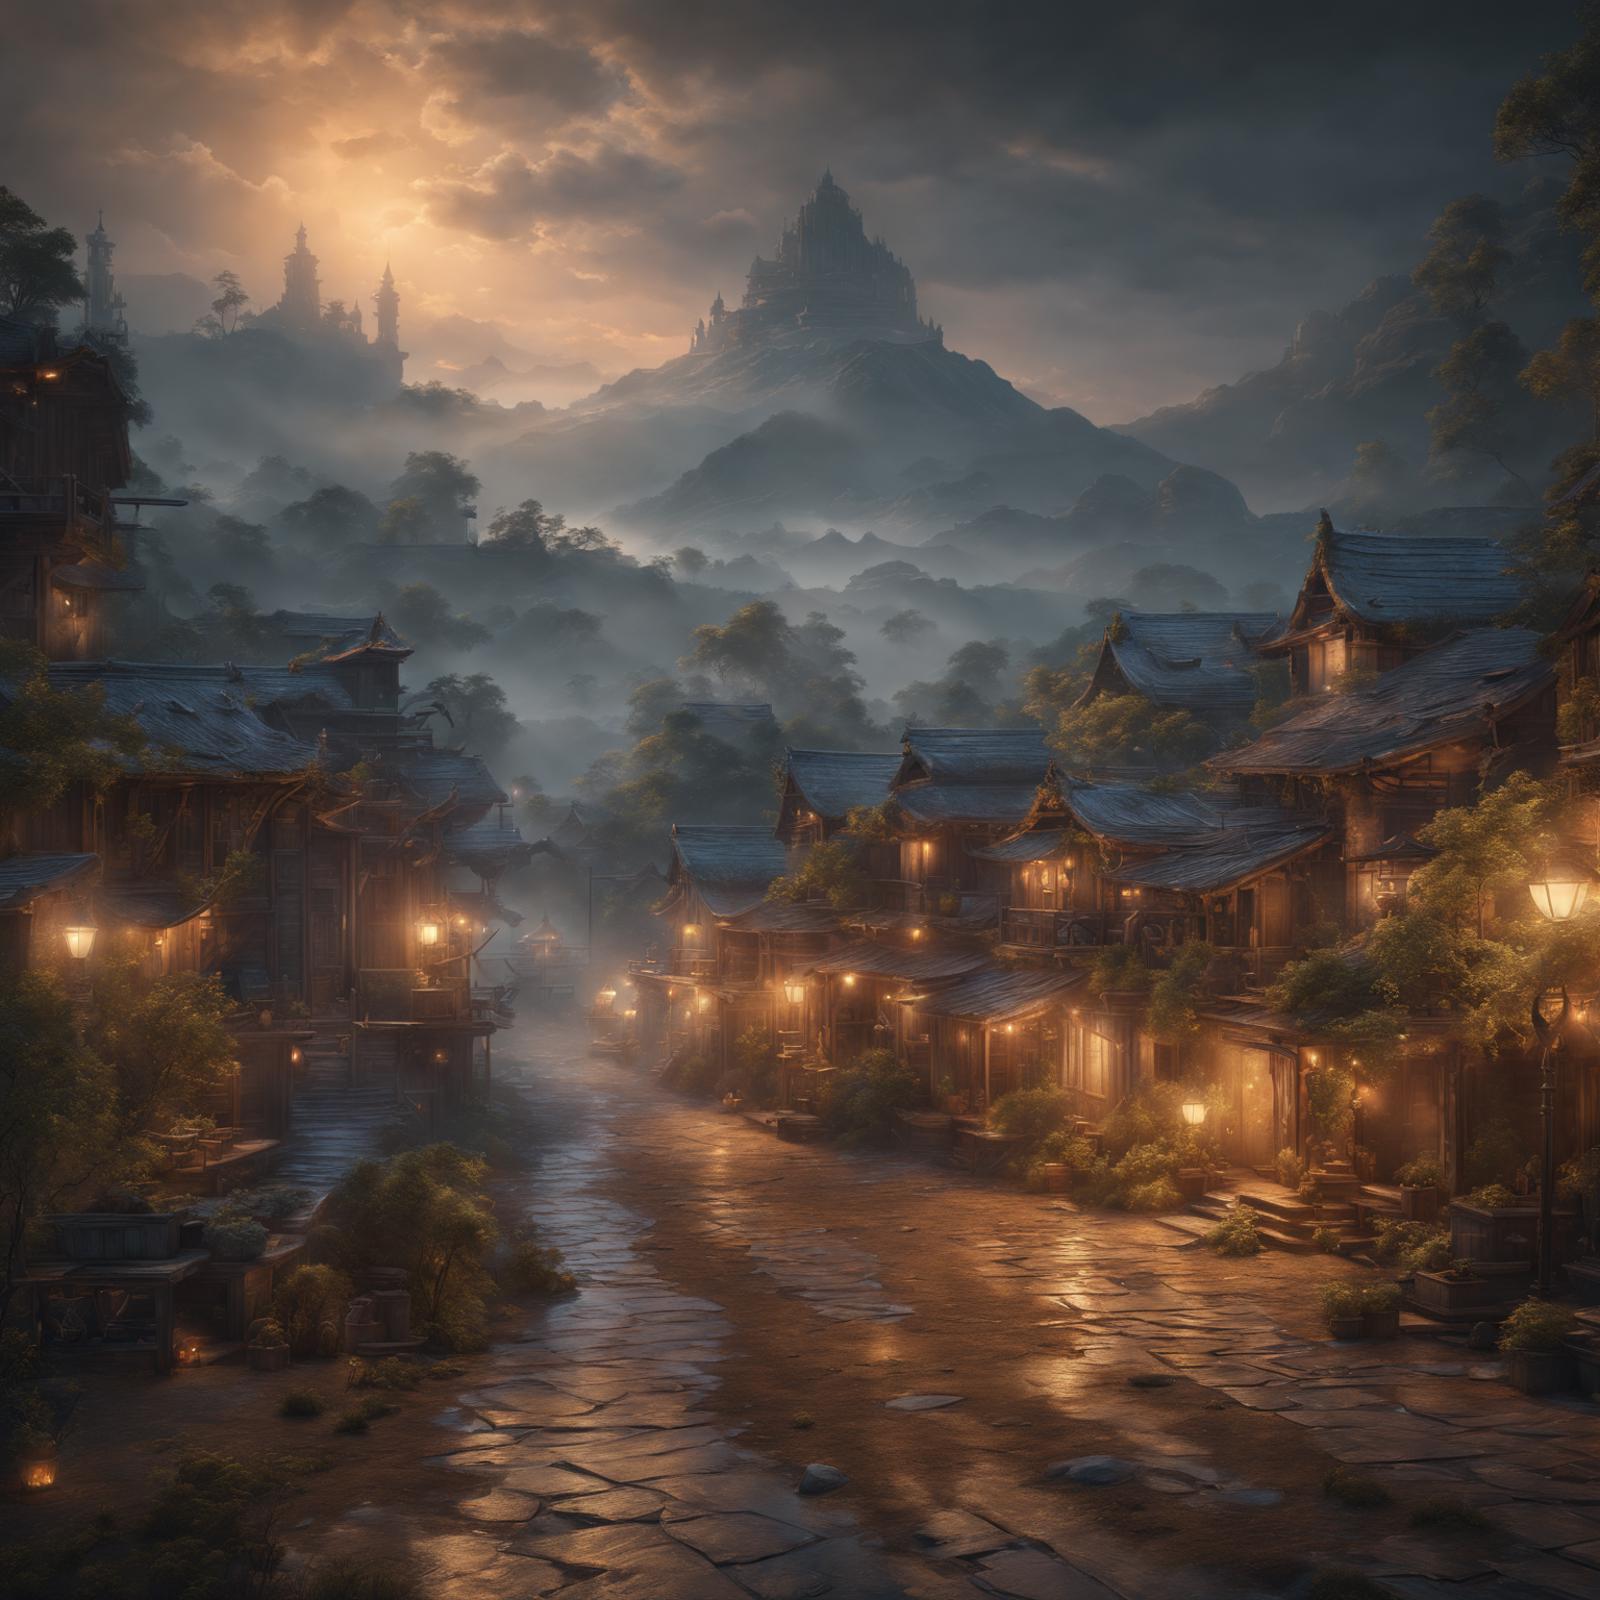 A picturesque scene of a village at dusk with a mountain backdrop.